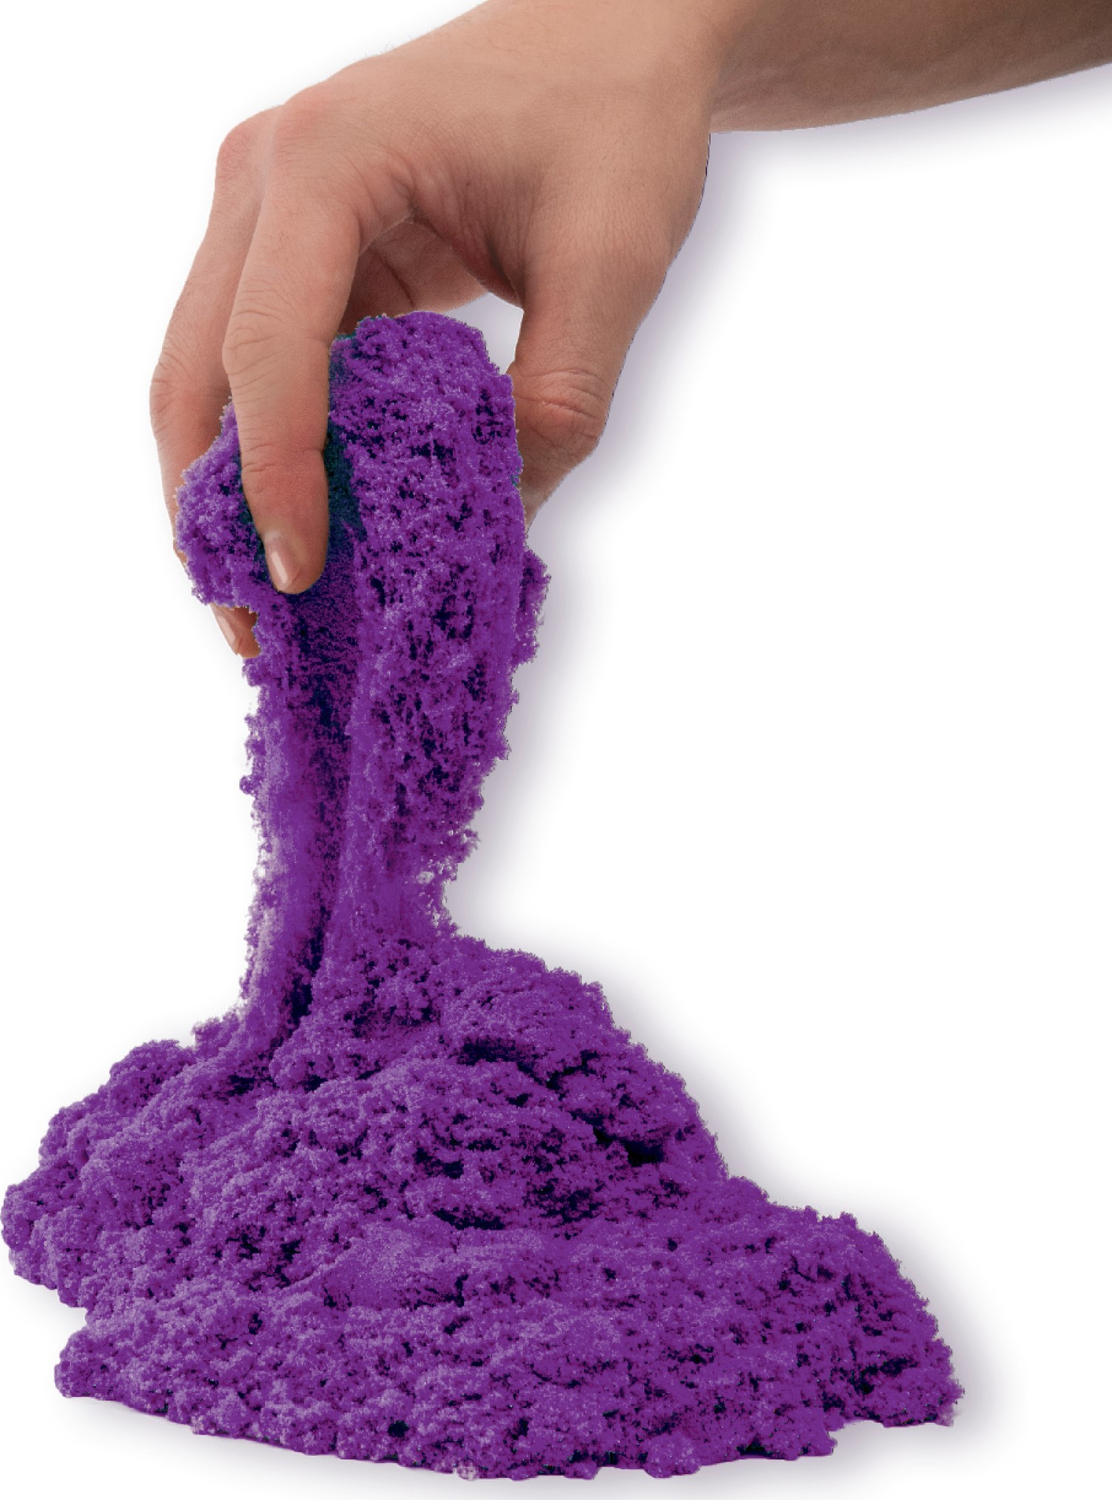 Kinetic Sand: Construction Zone, play, playset, non-toxic, kid